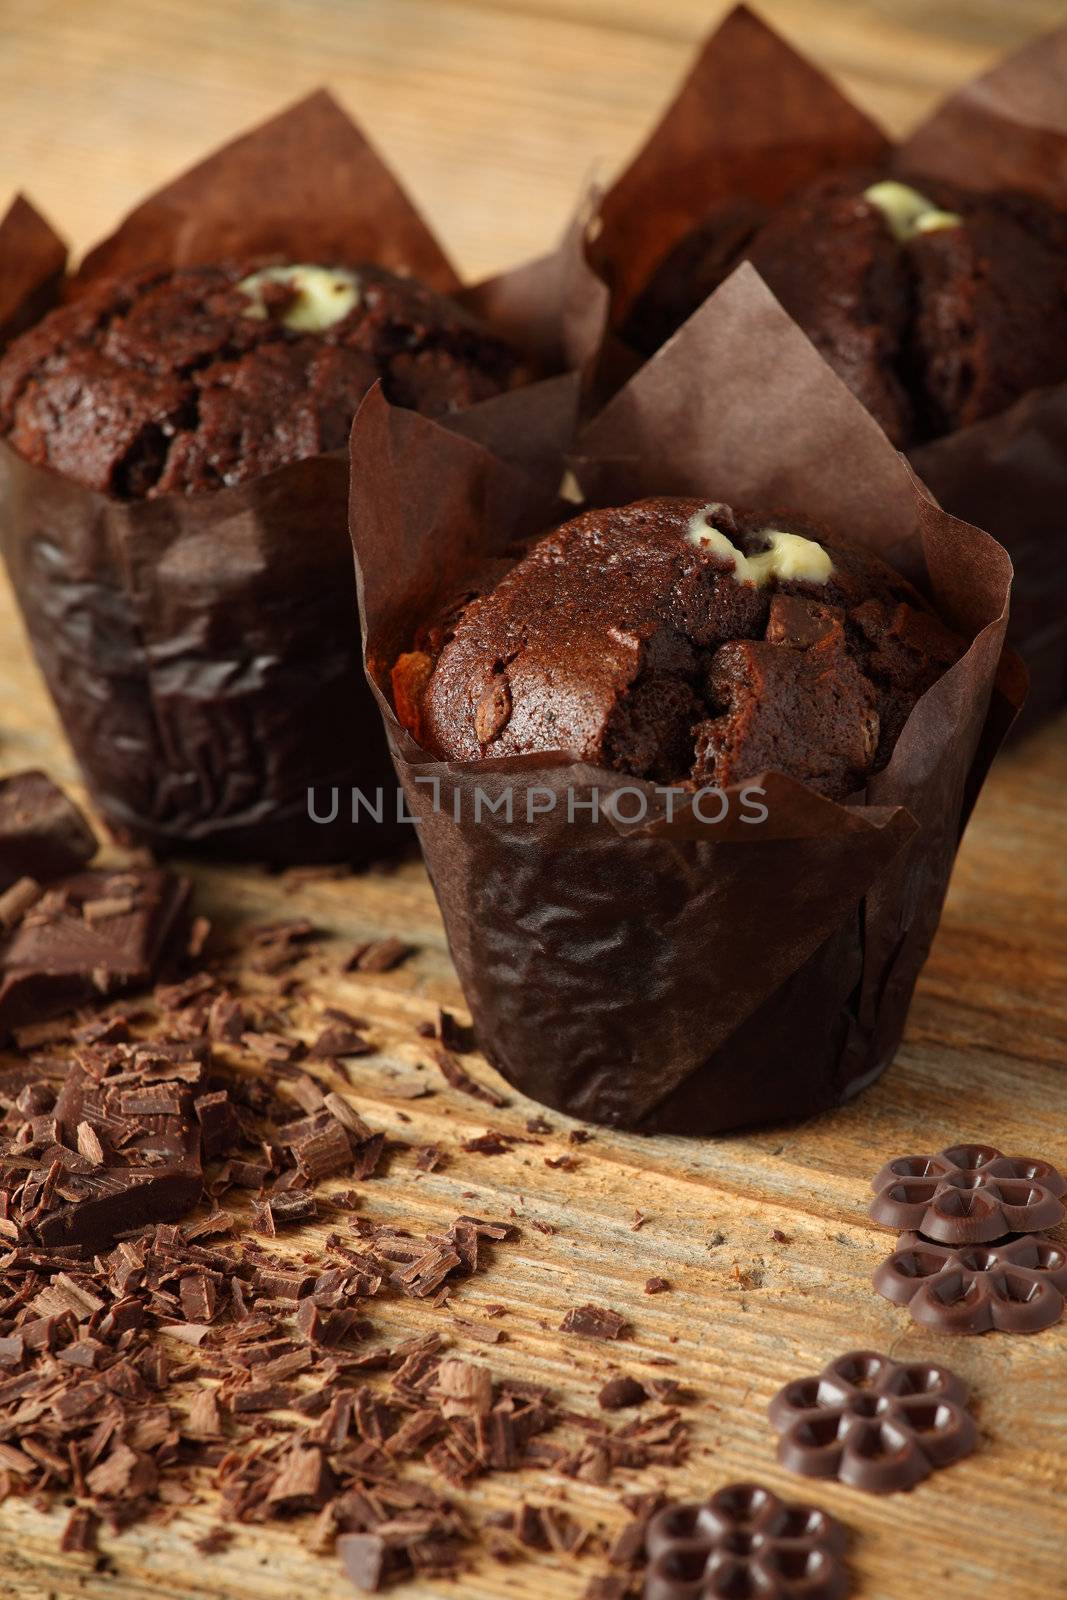 Chocolate muffins by sumners